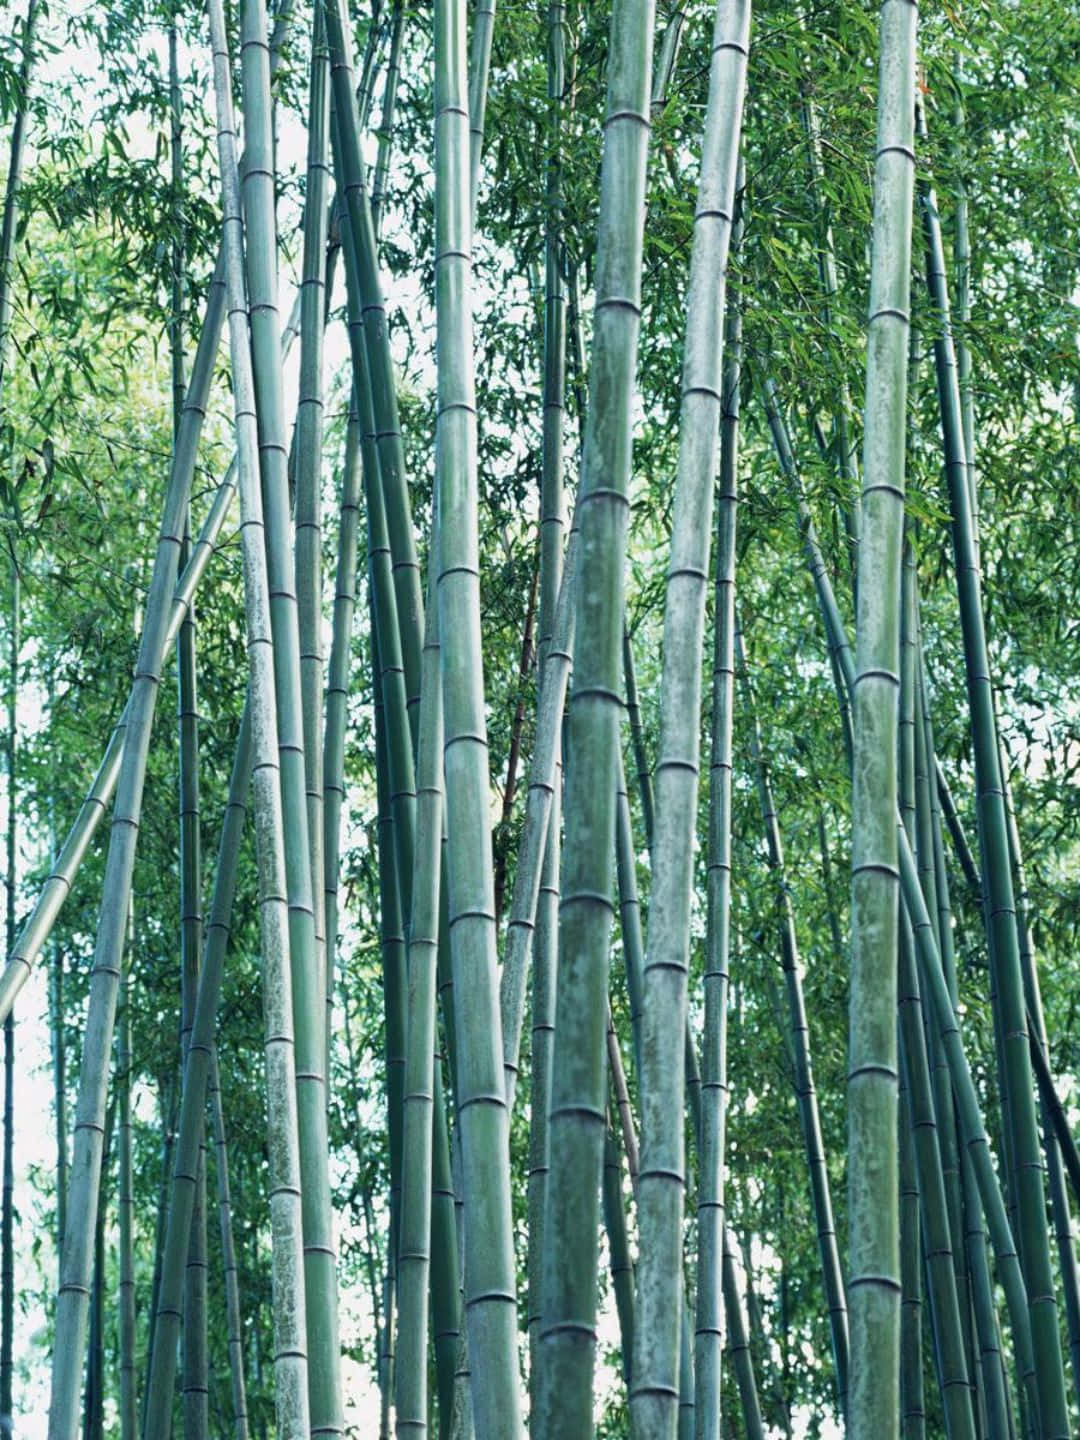 1440p Bamboo Background Bamboo Trees With Grey Stems